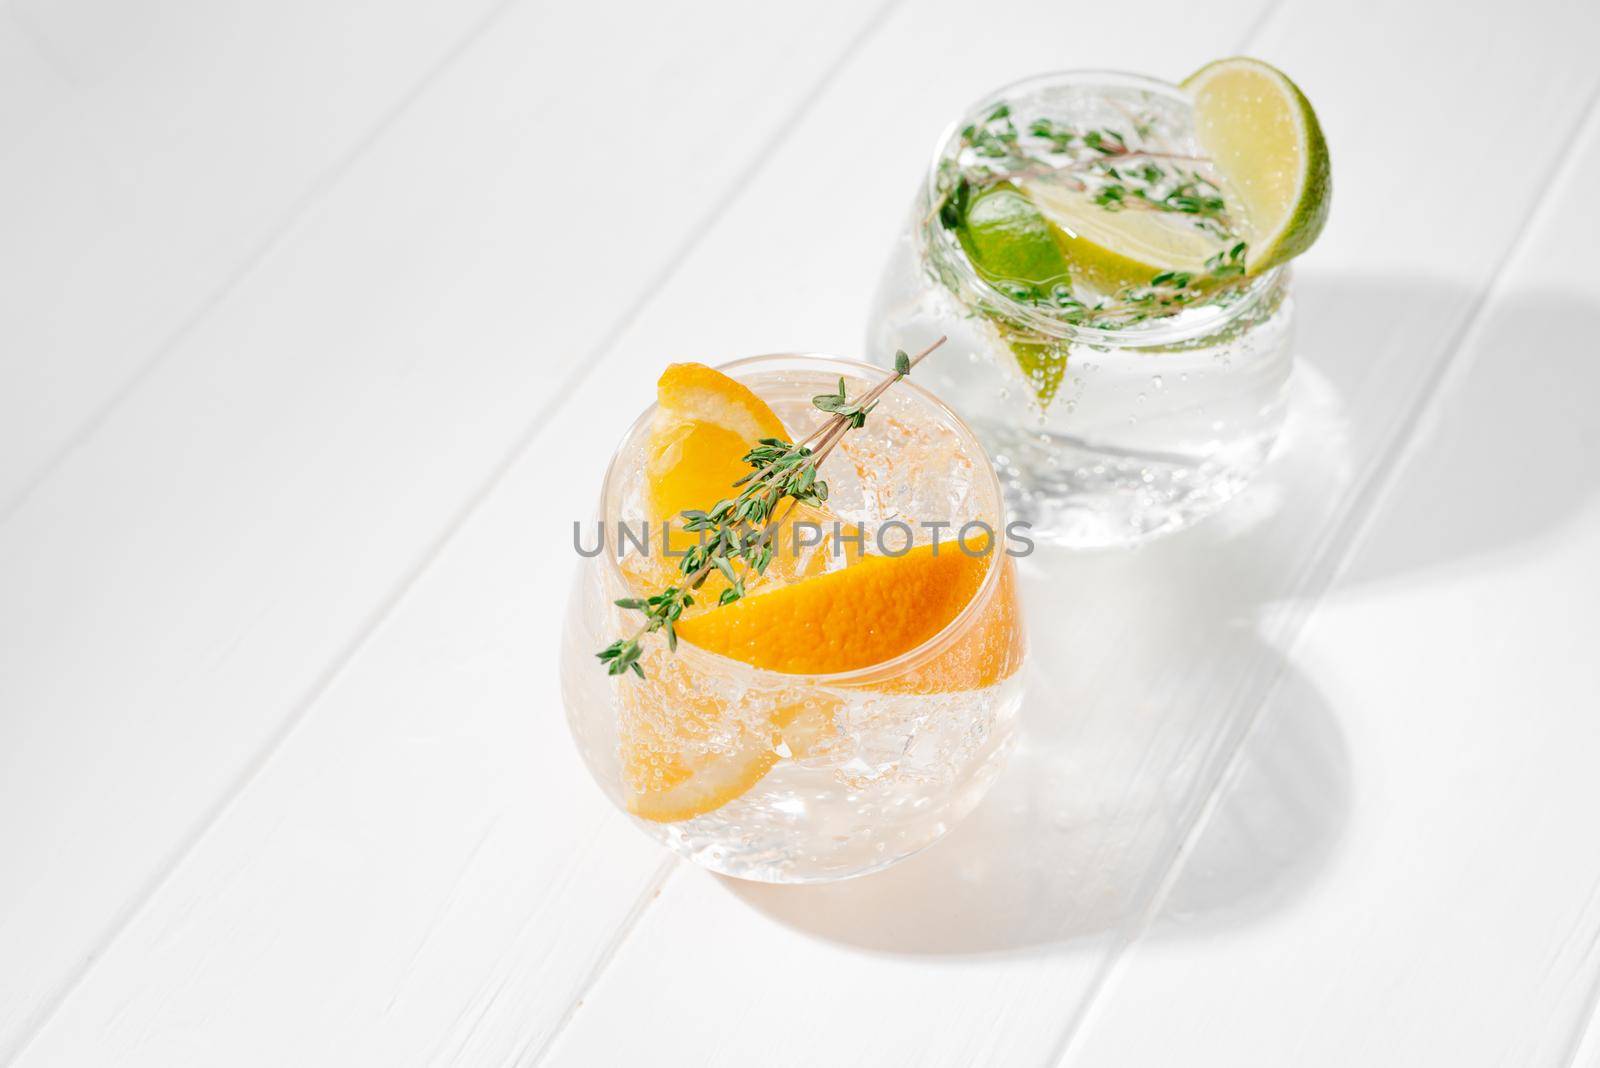 Set of different citrus lemonades with orange and lime on a light background. Tough sunshine. Flashy food by gulyaevstudio